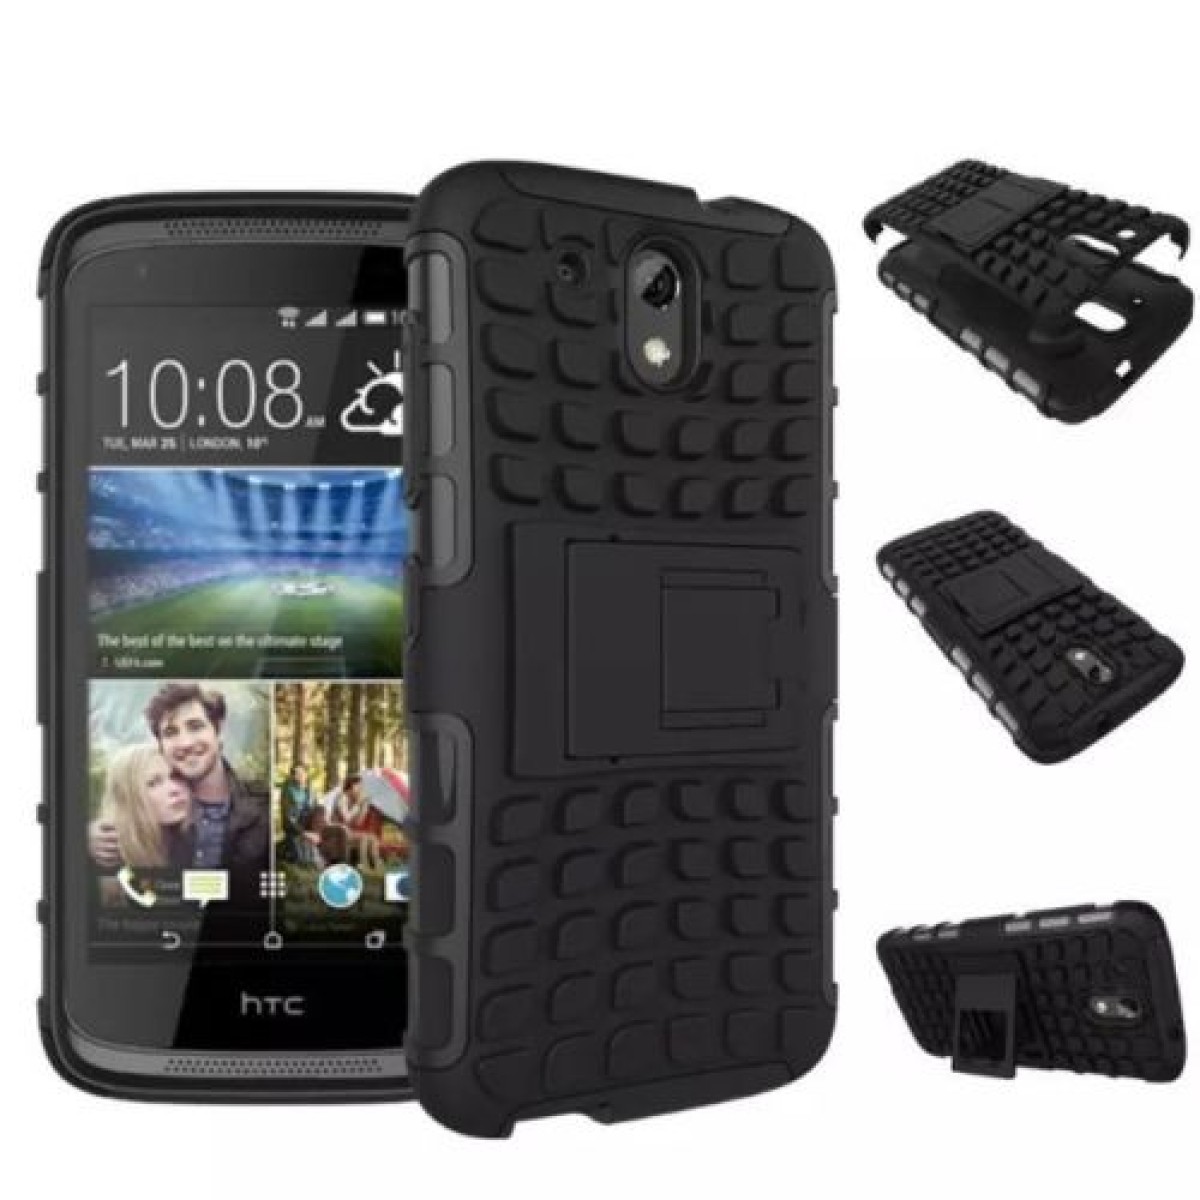 onder ervaring Lounge Case Protector Silicone Dual HTC 526 Black w/kickstand a: 199.00